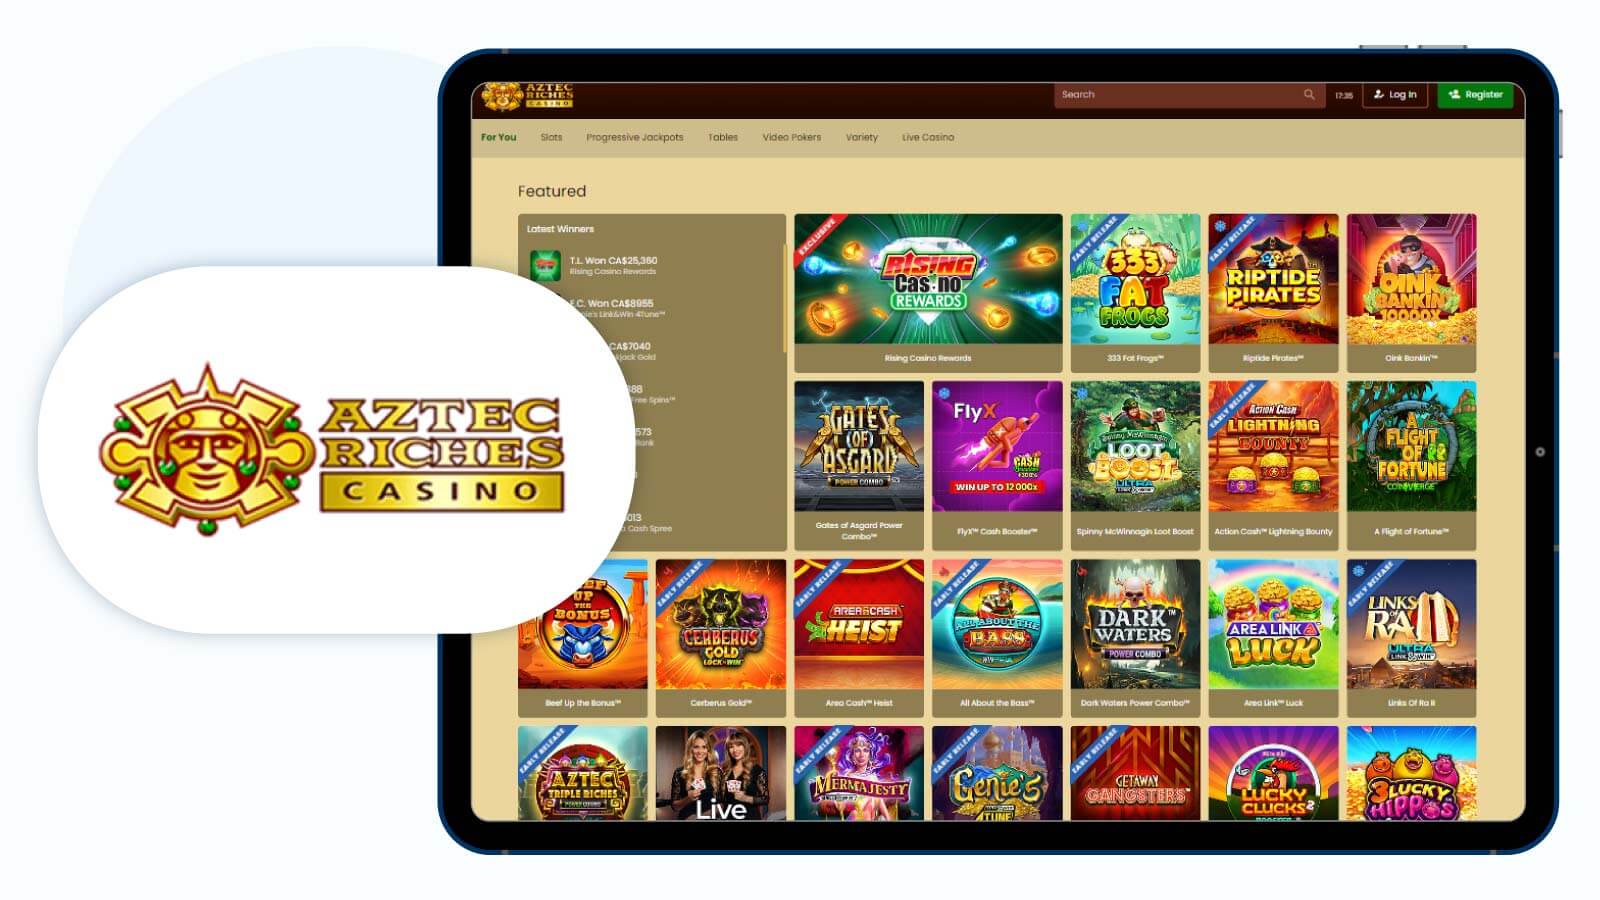 Aztec Riches Casino - Among the Most Popular Skrill Casinos in NZ